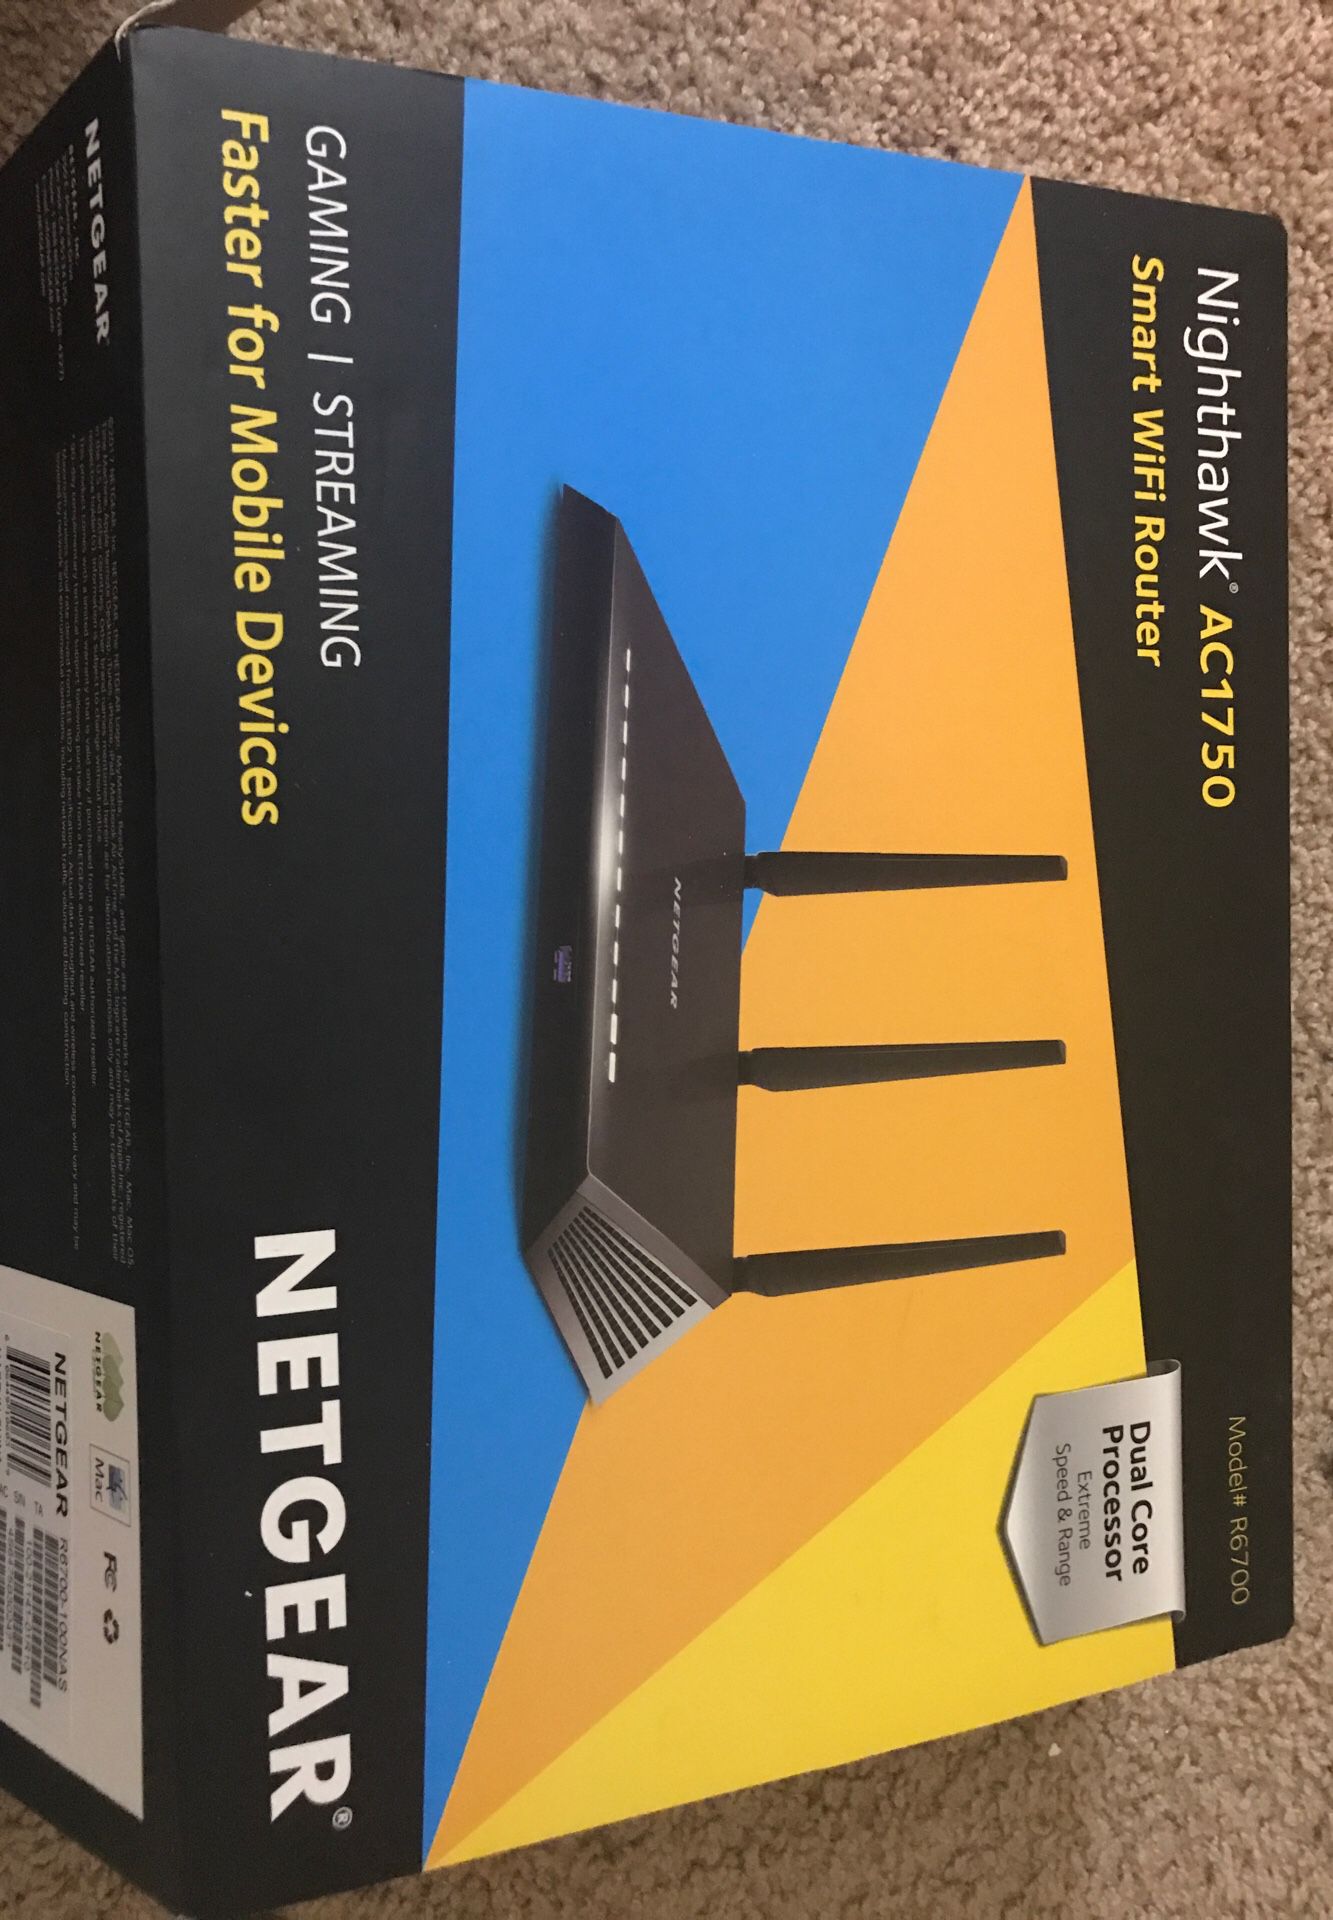 Nighthawk AC1750 Smart WiFi Router Gaming|Streaming